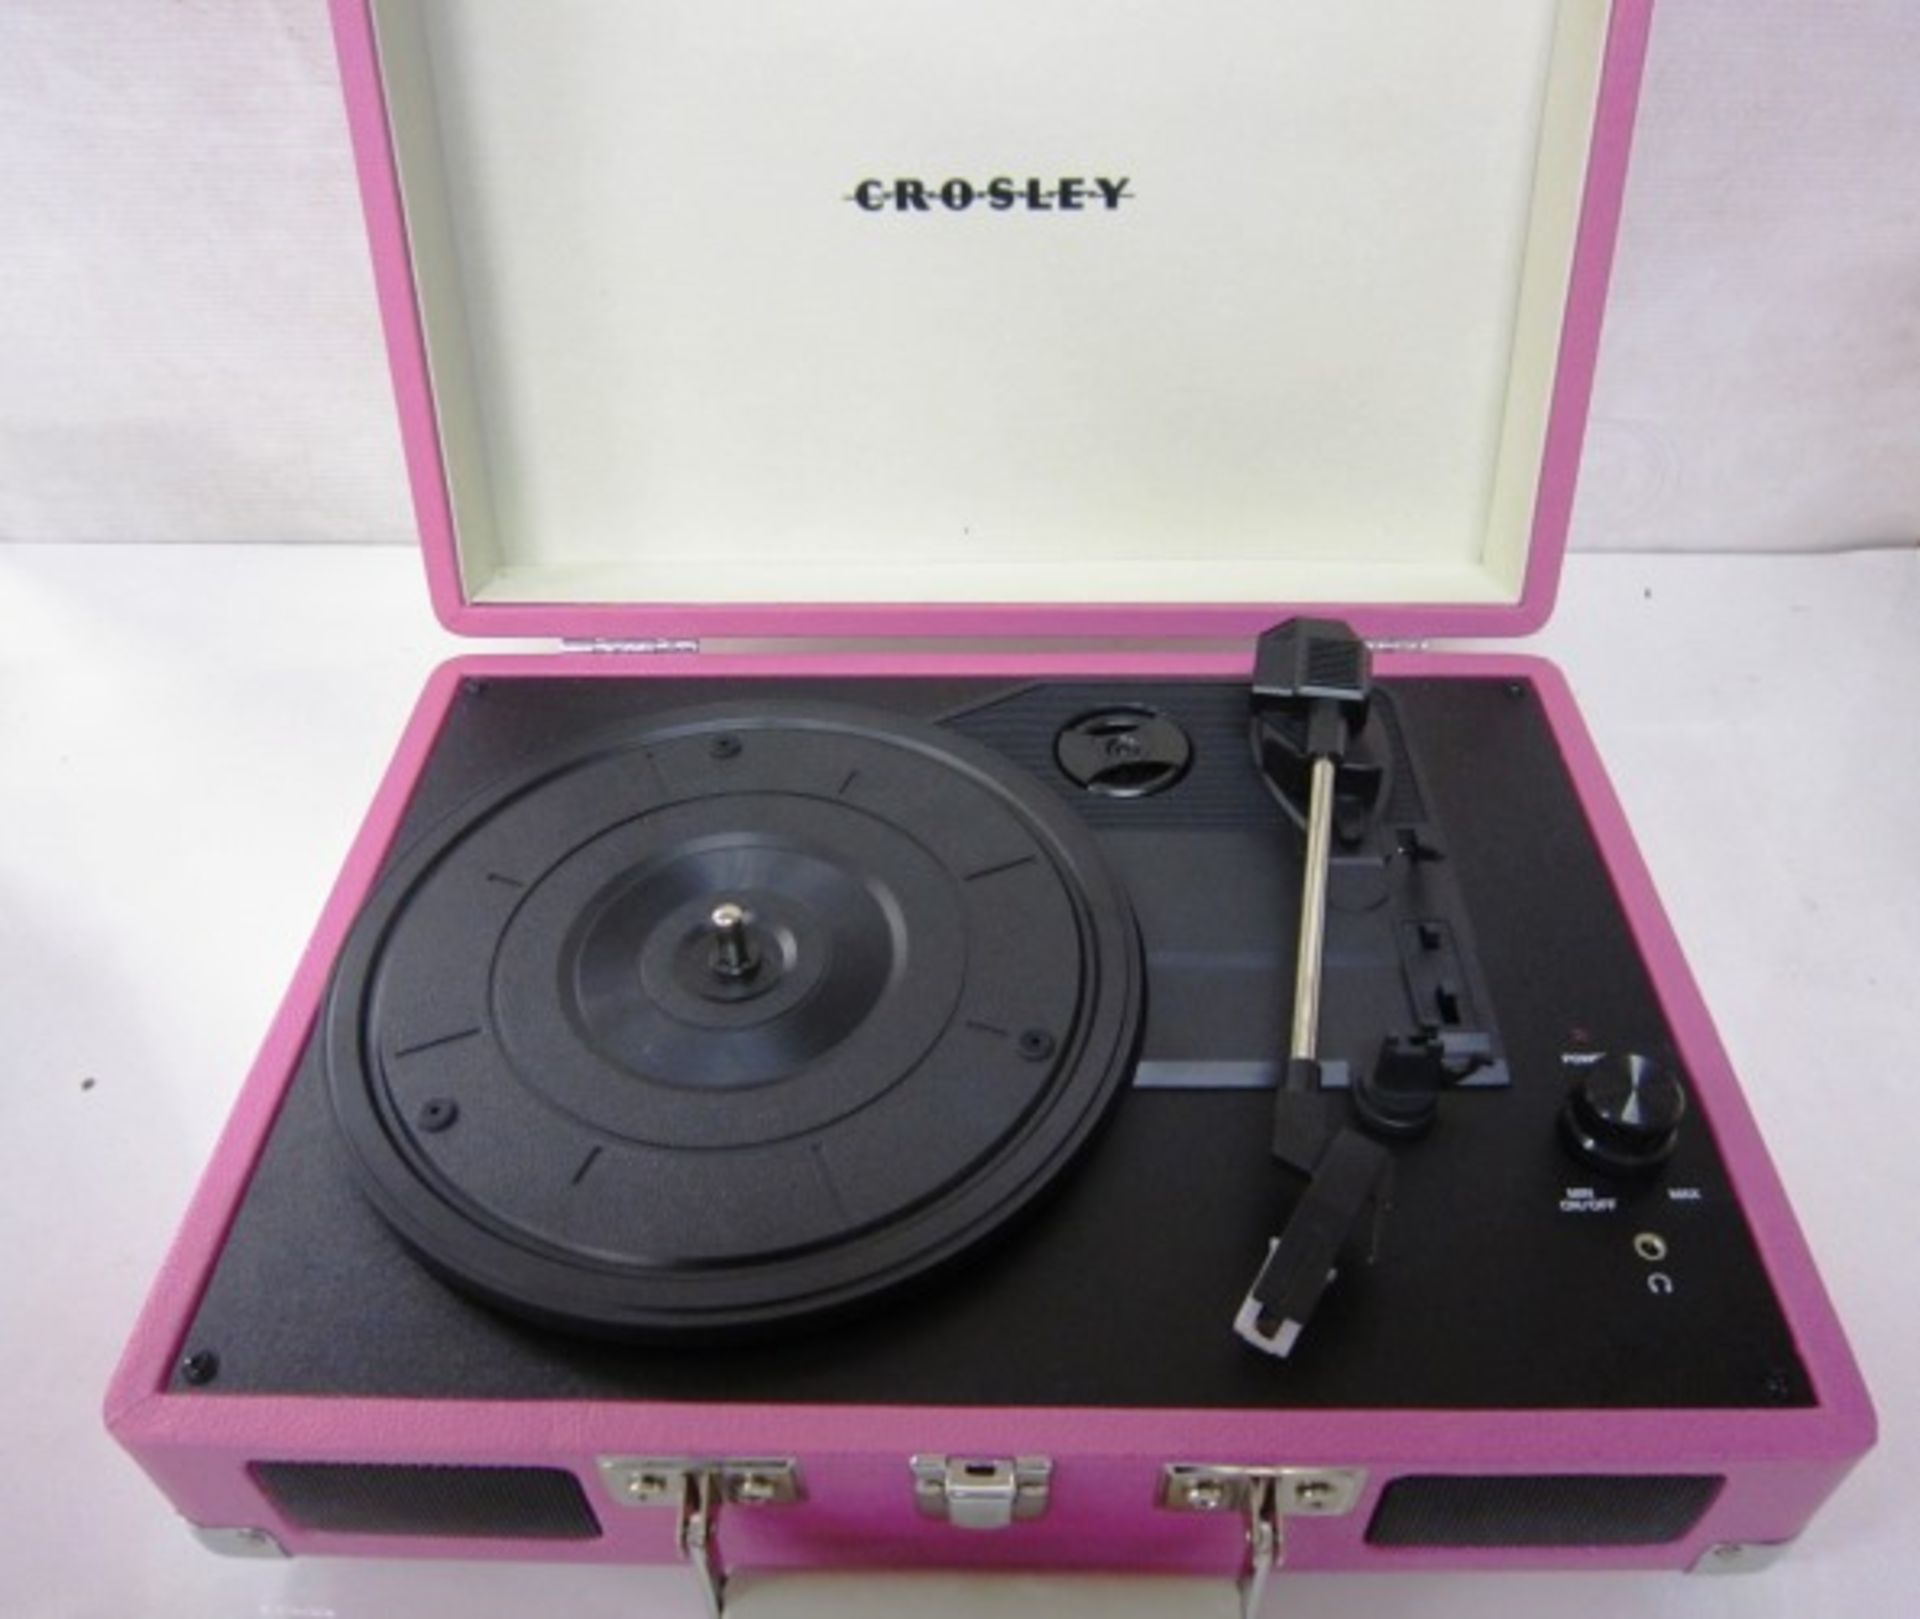 Crosley Cruiser 3 speed portable turntable Model CR8005A-PI. Impressive sound performance meets - Image 3 of 3